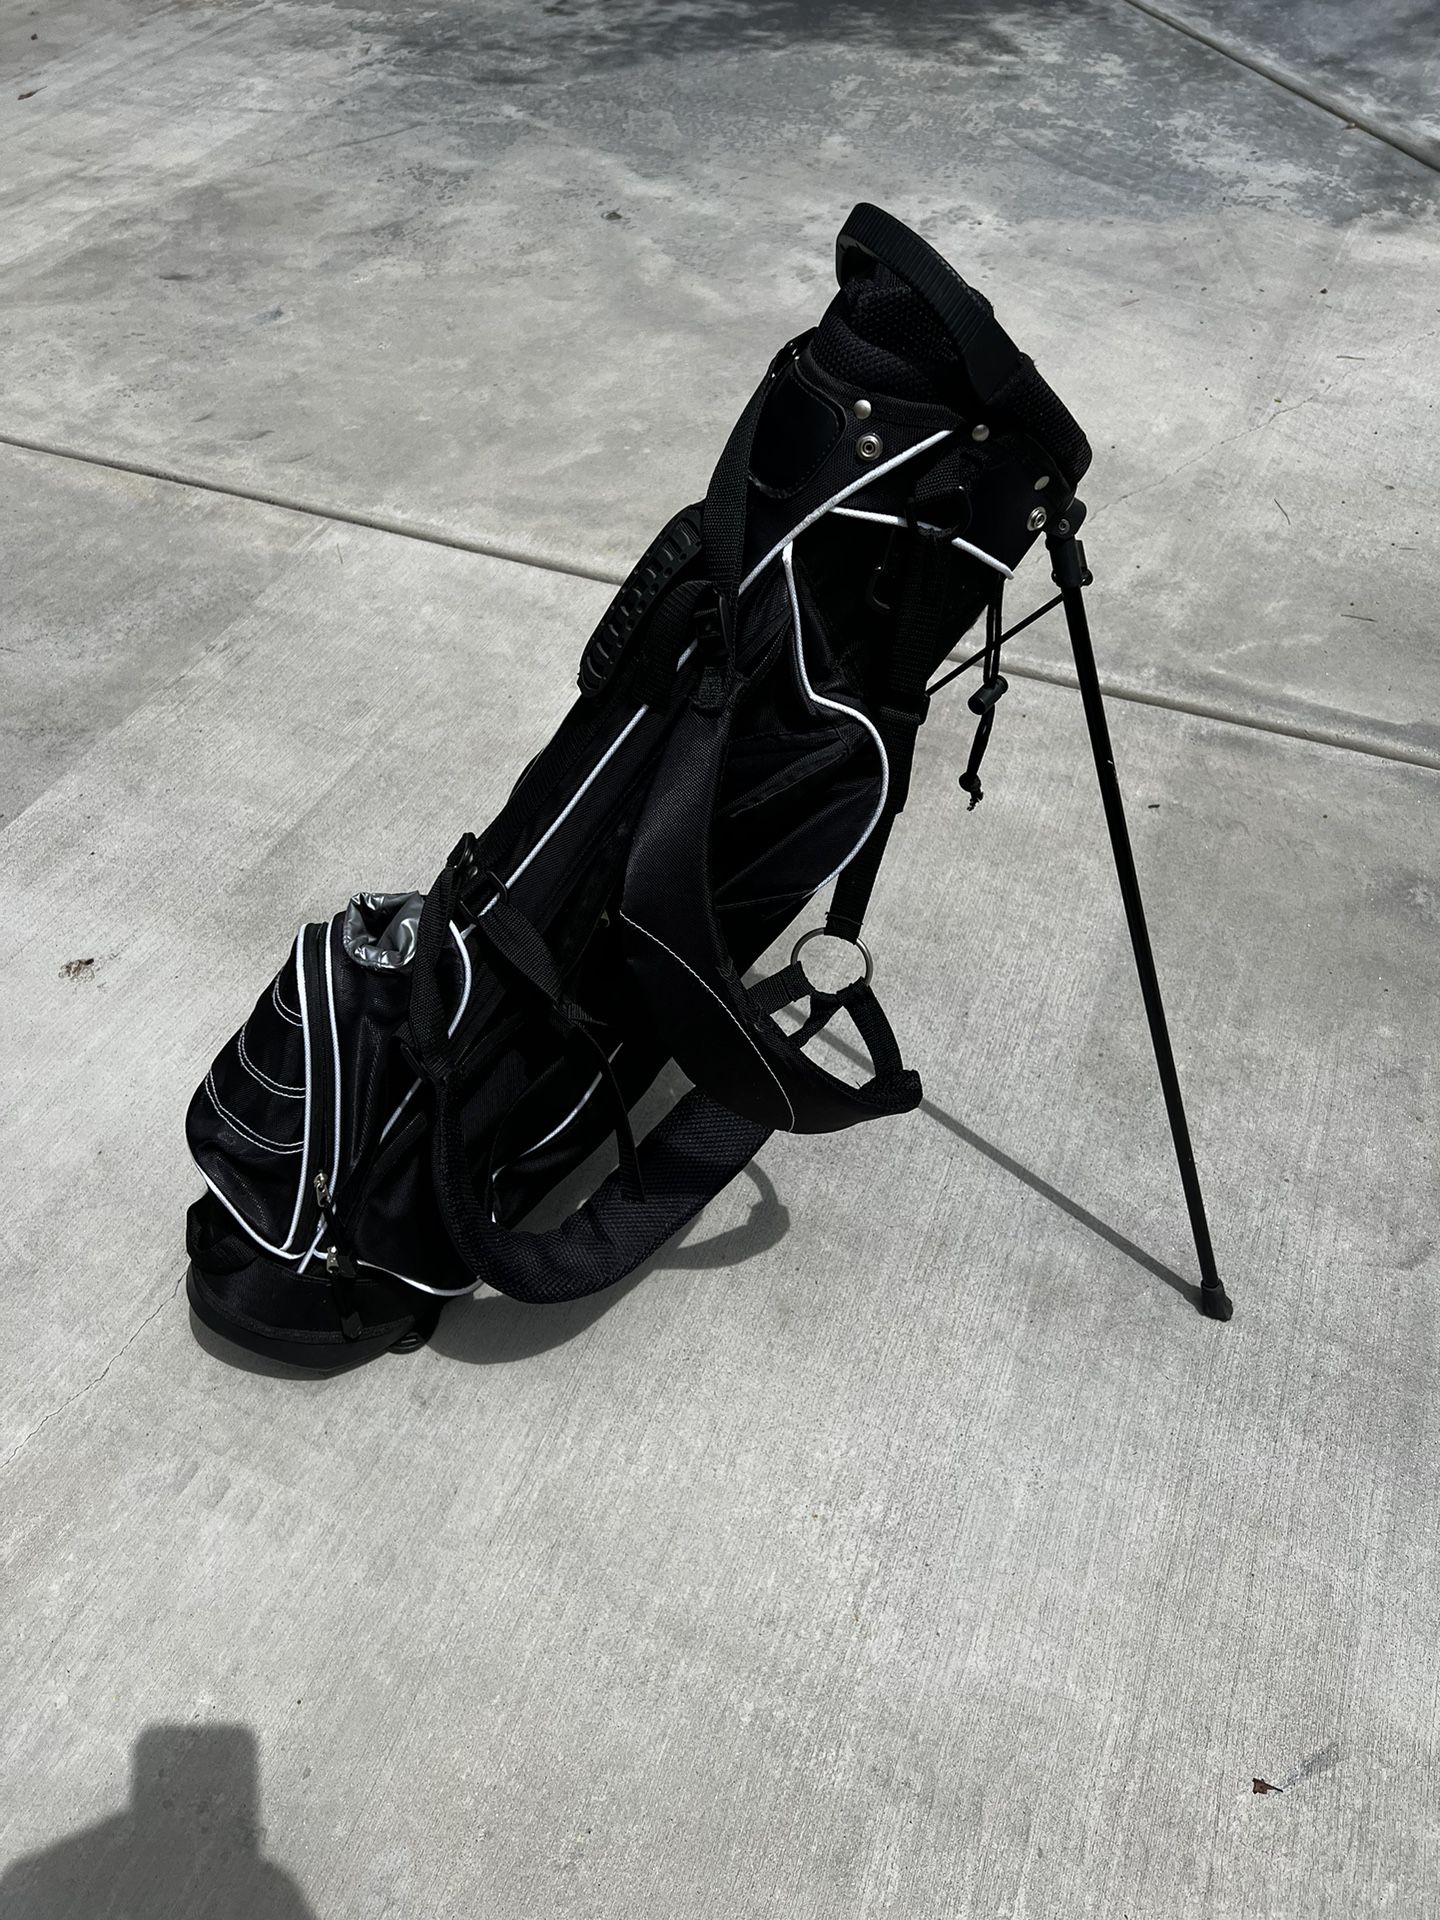 Barely Used golf bag light weight